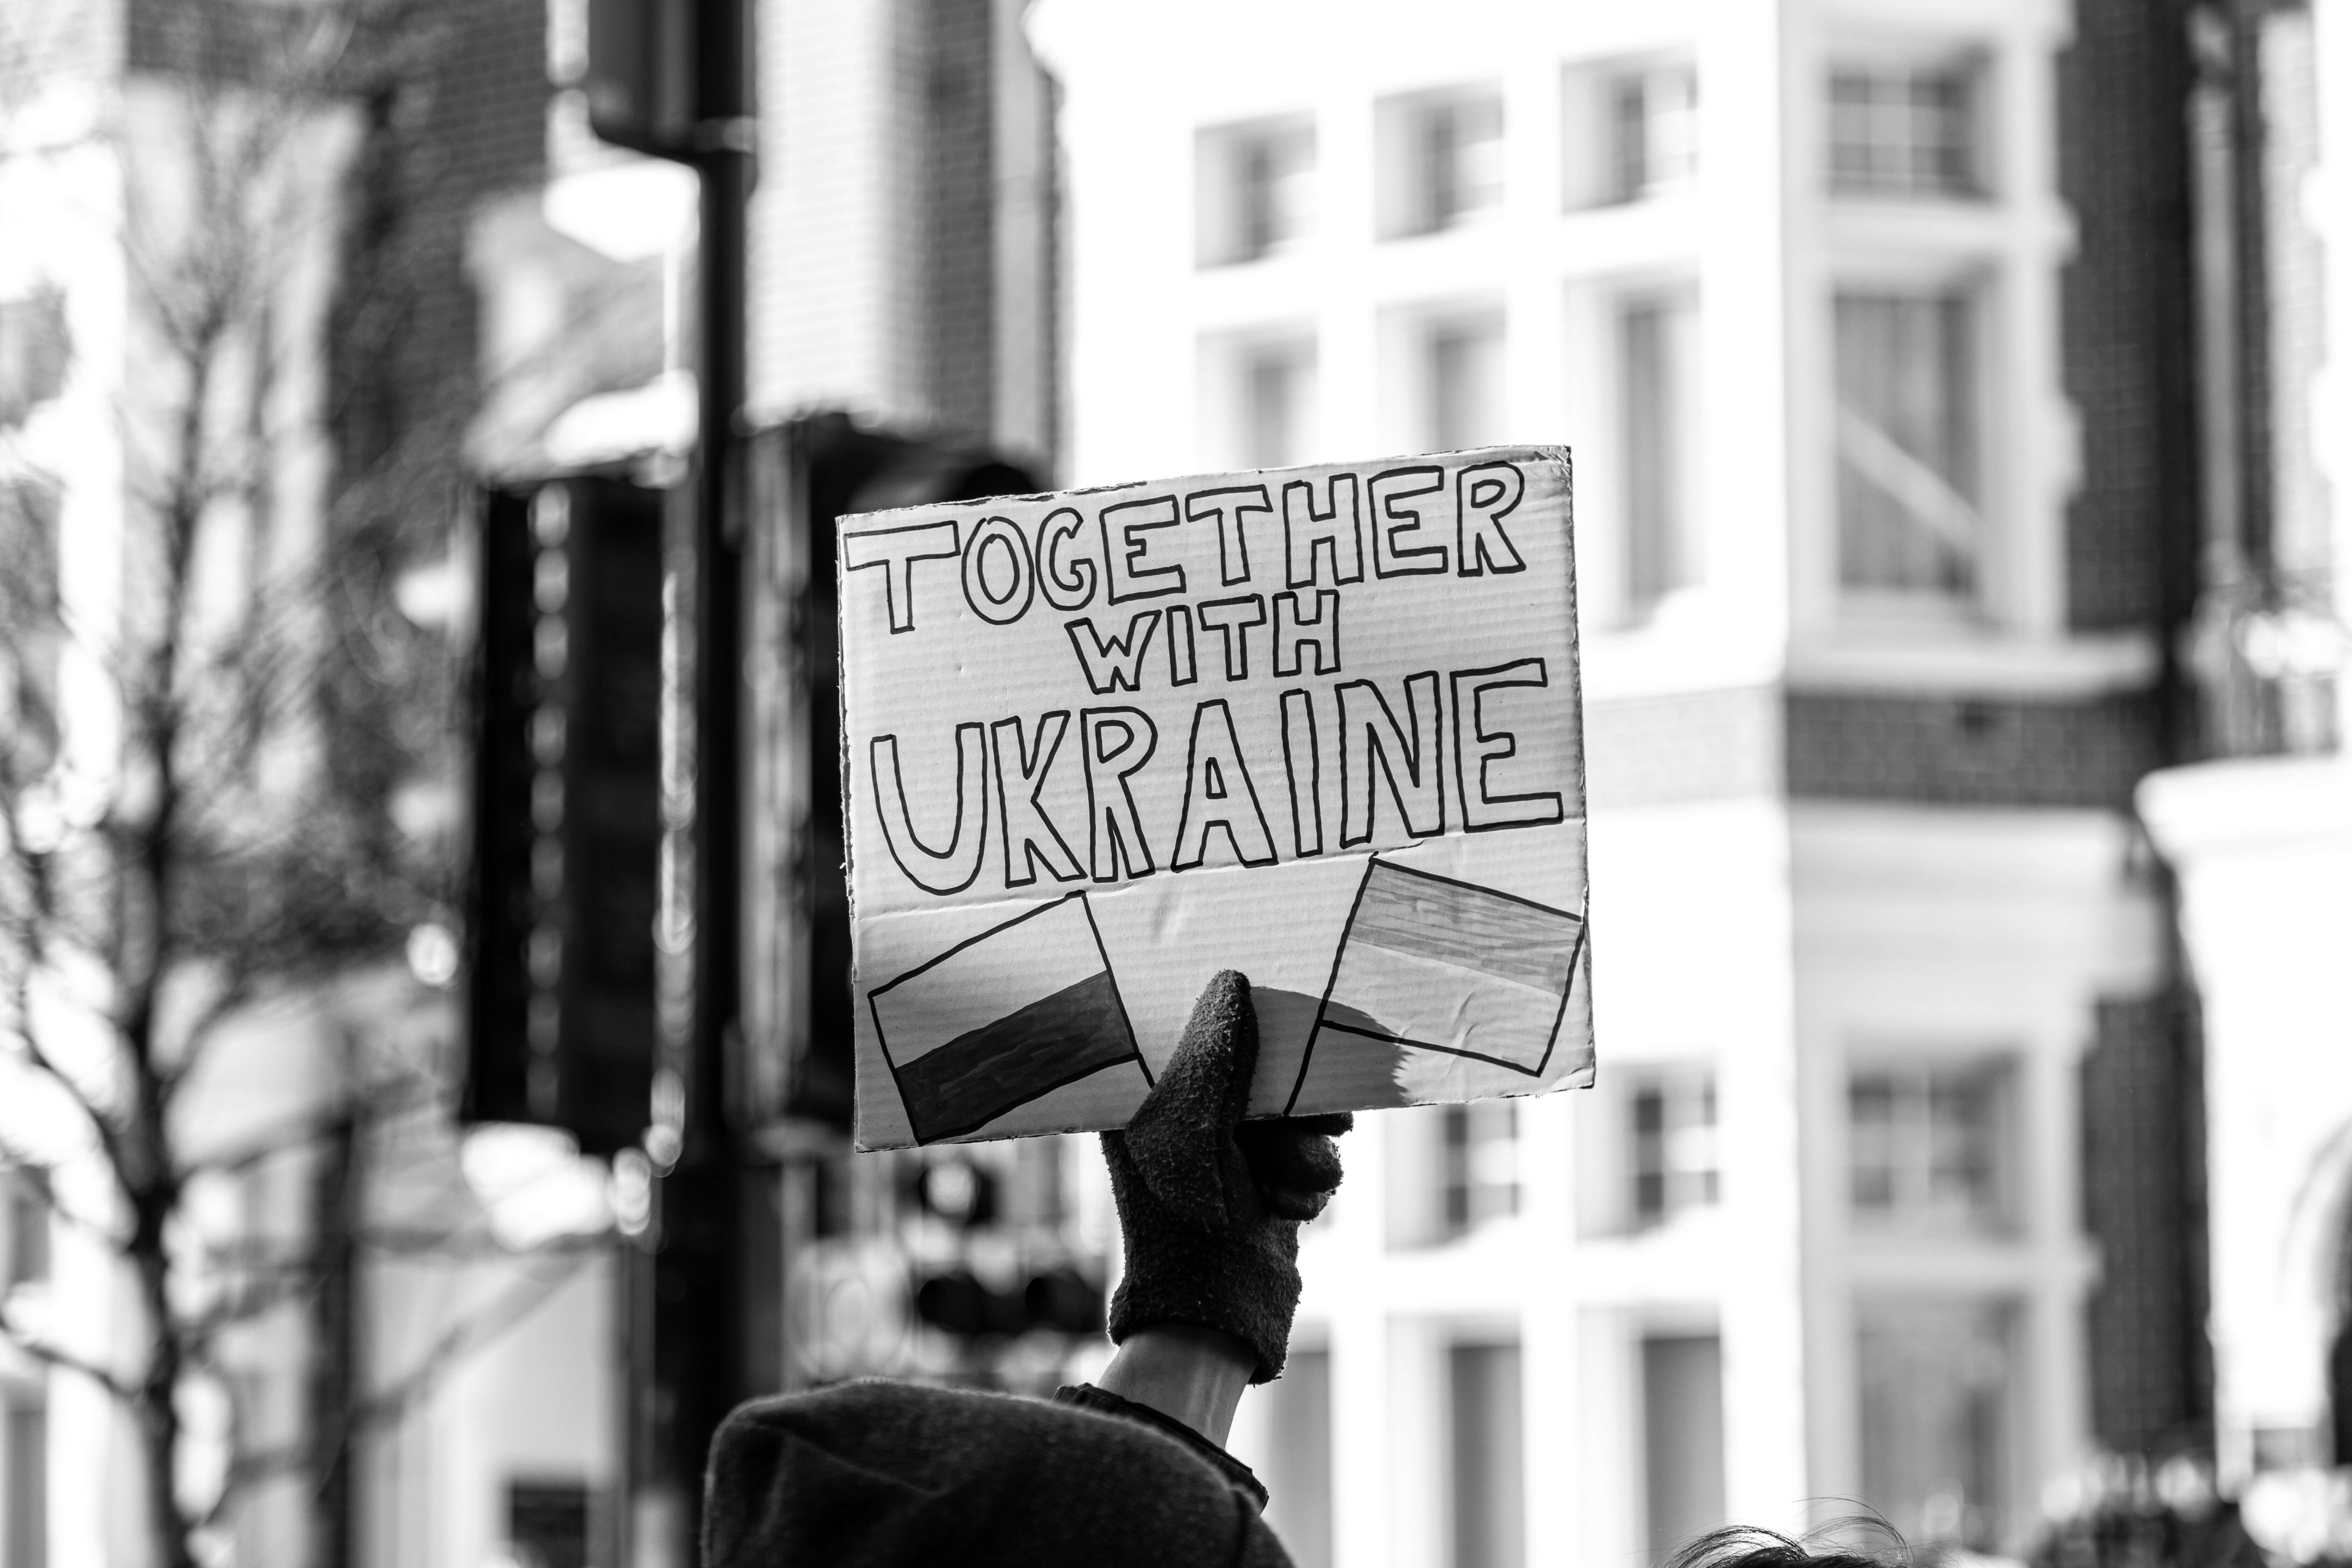 A protester holding up a sign saying "Together With Ukraine".